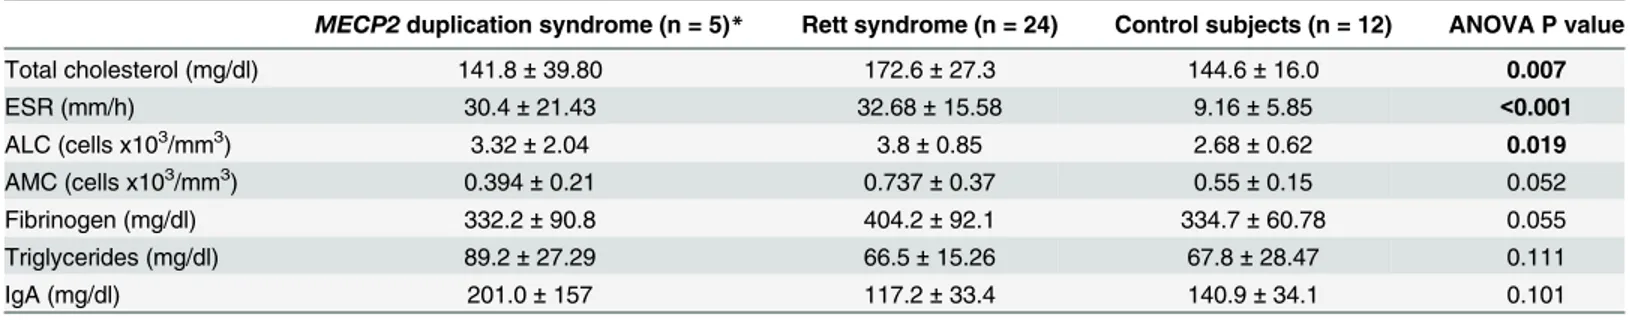 Table 2. Routine chemistry biomarkers in patients with MECP2 duplication syndrome, Rett syndrome, and control subjects.